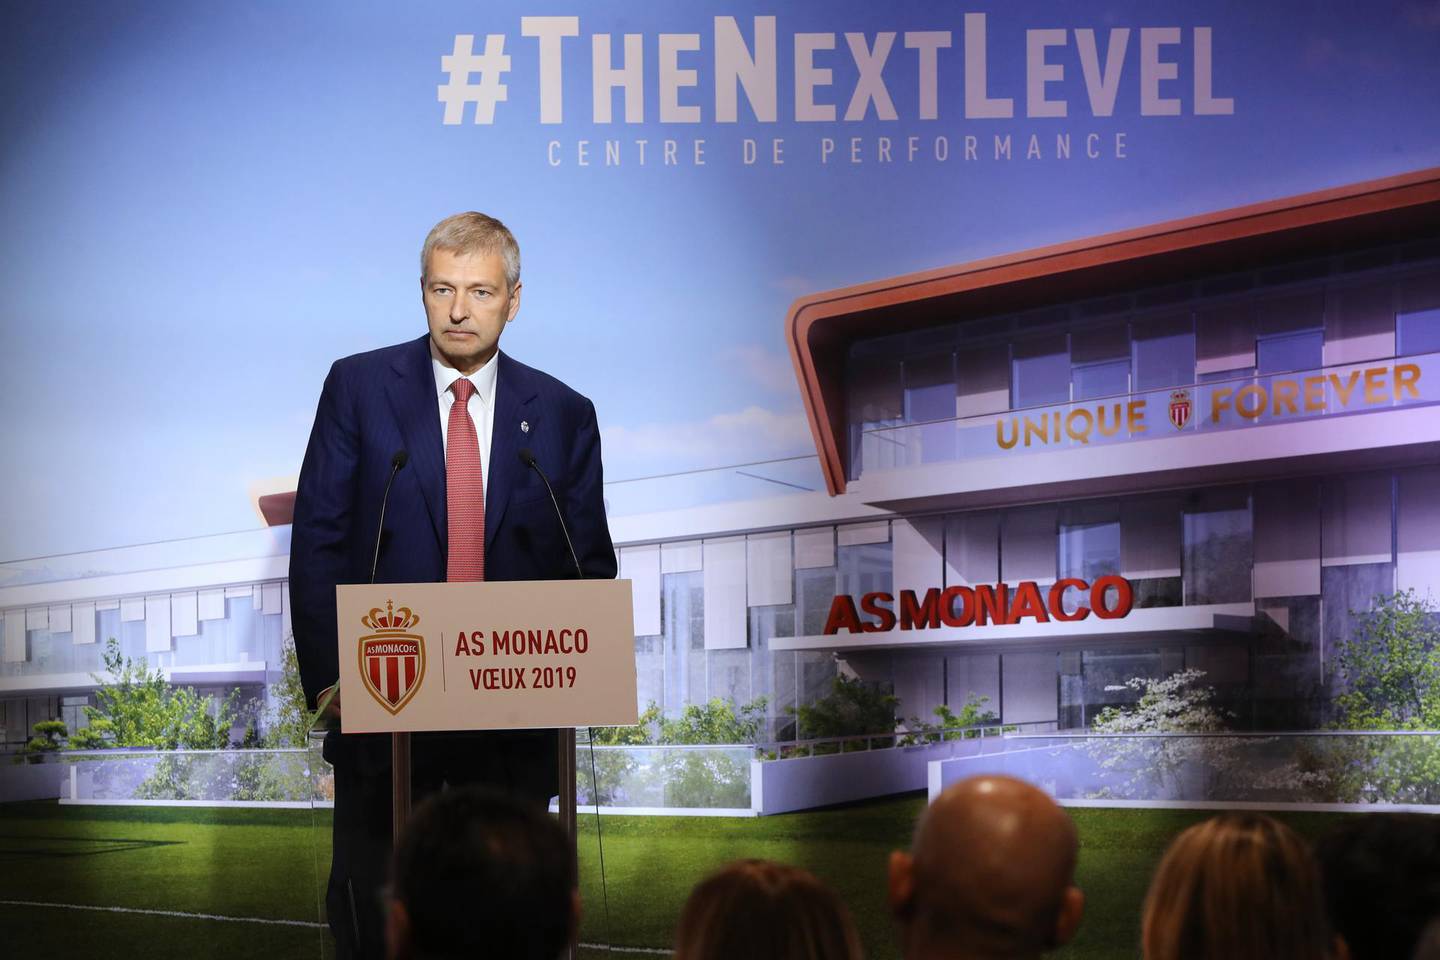 Monaco's Russian President Dmitri Rybolovlev speaks during a presentation of a new team training grounds and to present his new year's wishes on January 16 , 2019 at the Louis II Stadium in Monaco. (Photo by VALERY HACHE / AFP)